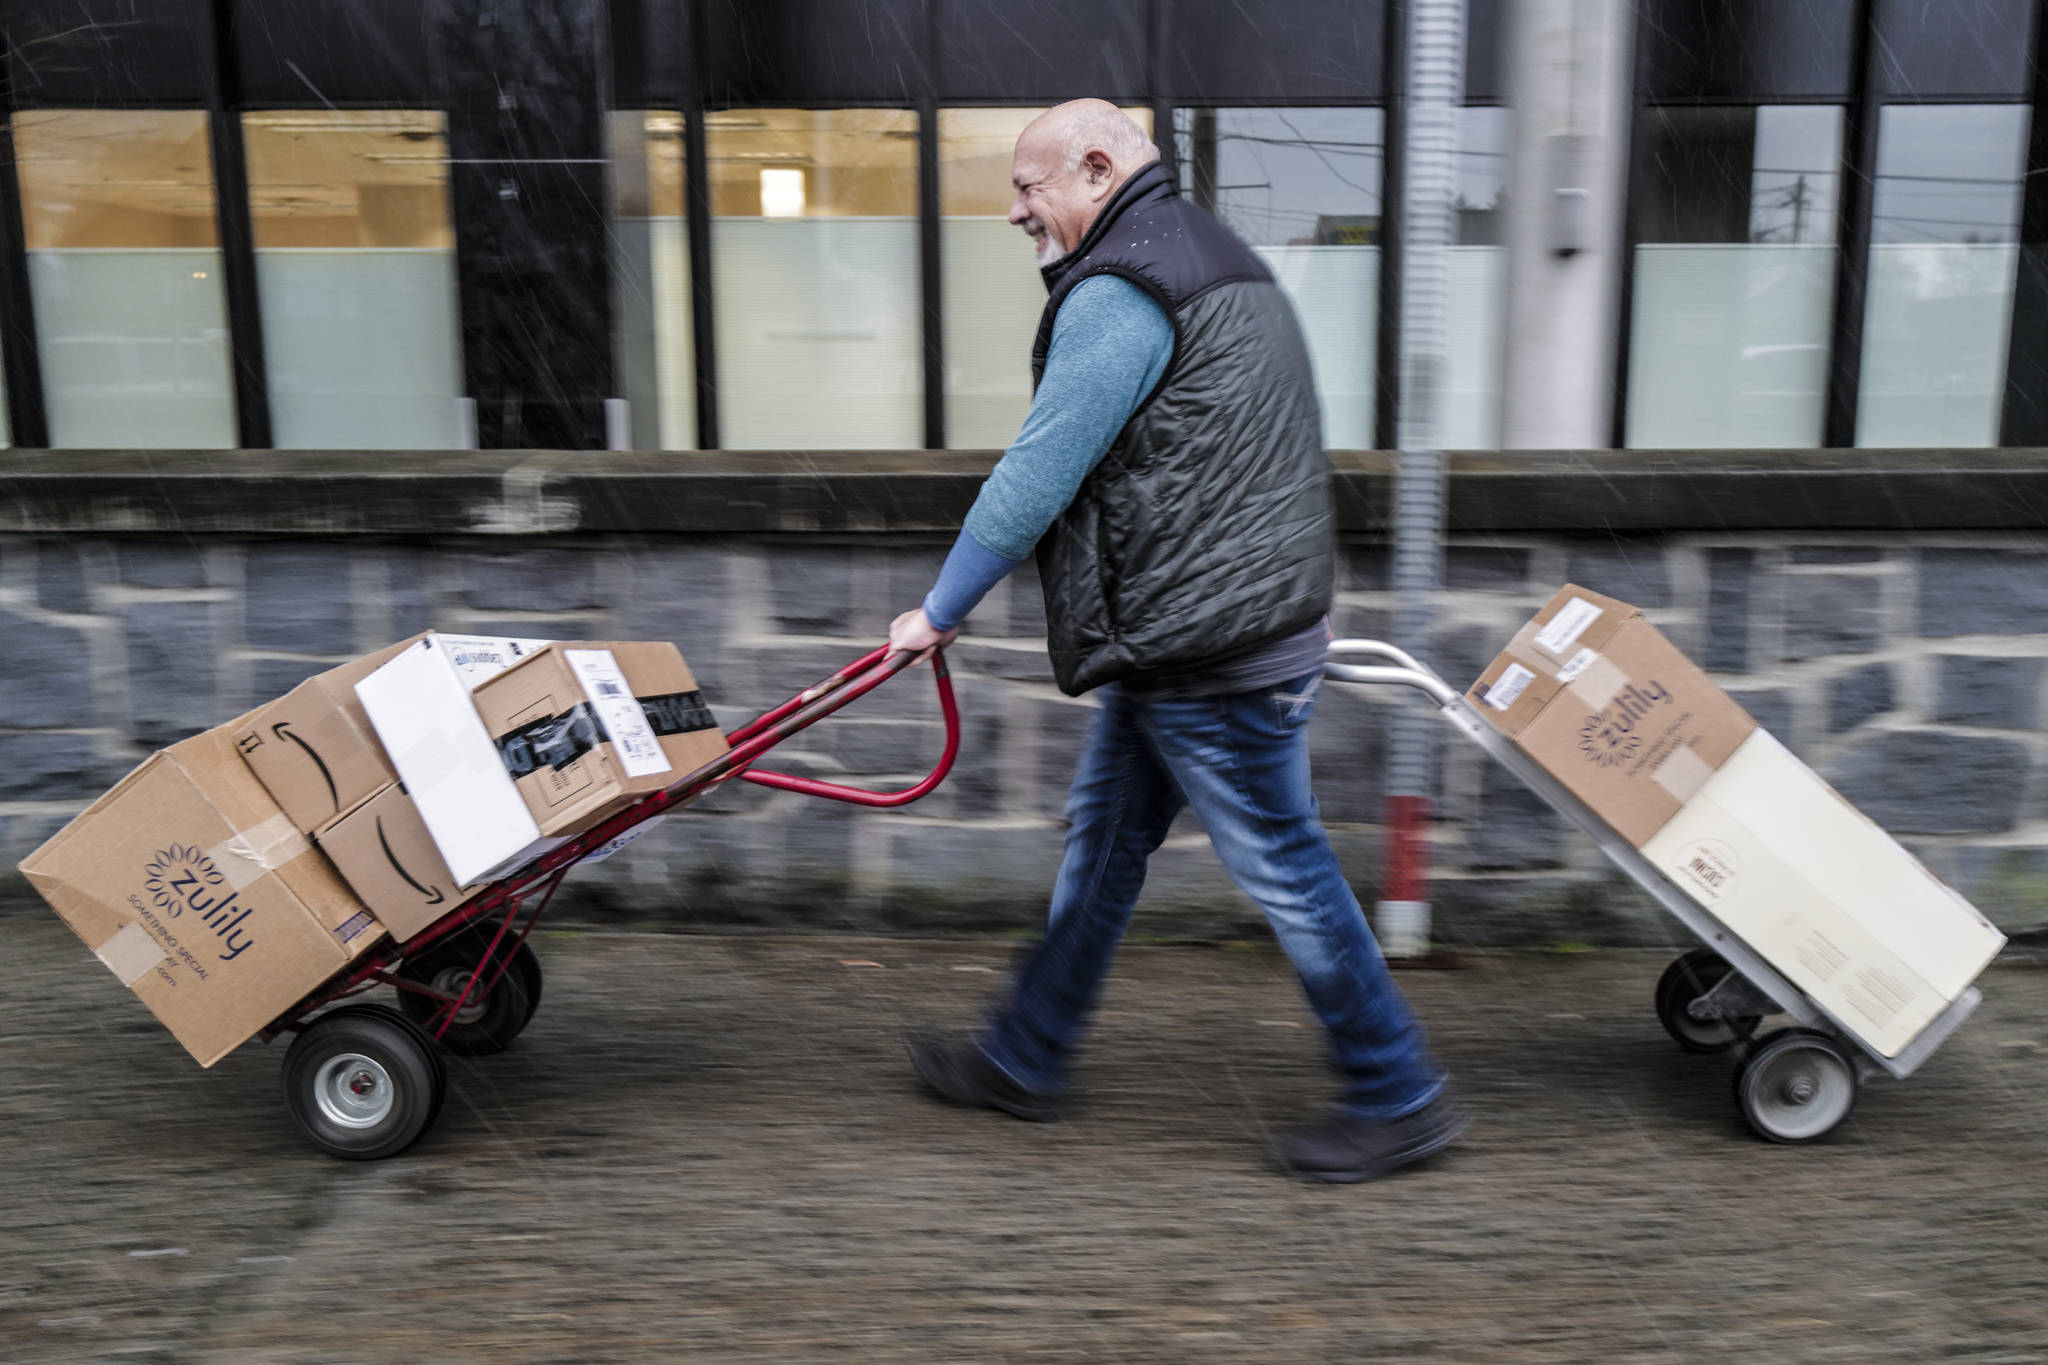 Kenny Solomon-Gross retrieves packages at the Federal Building Post Office on Tuesday, Dec. 17, 2019. (Michael Penn | Juneau Empire)